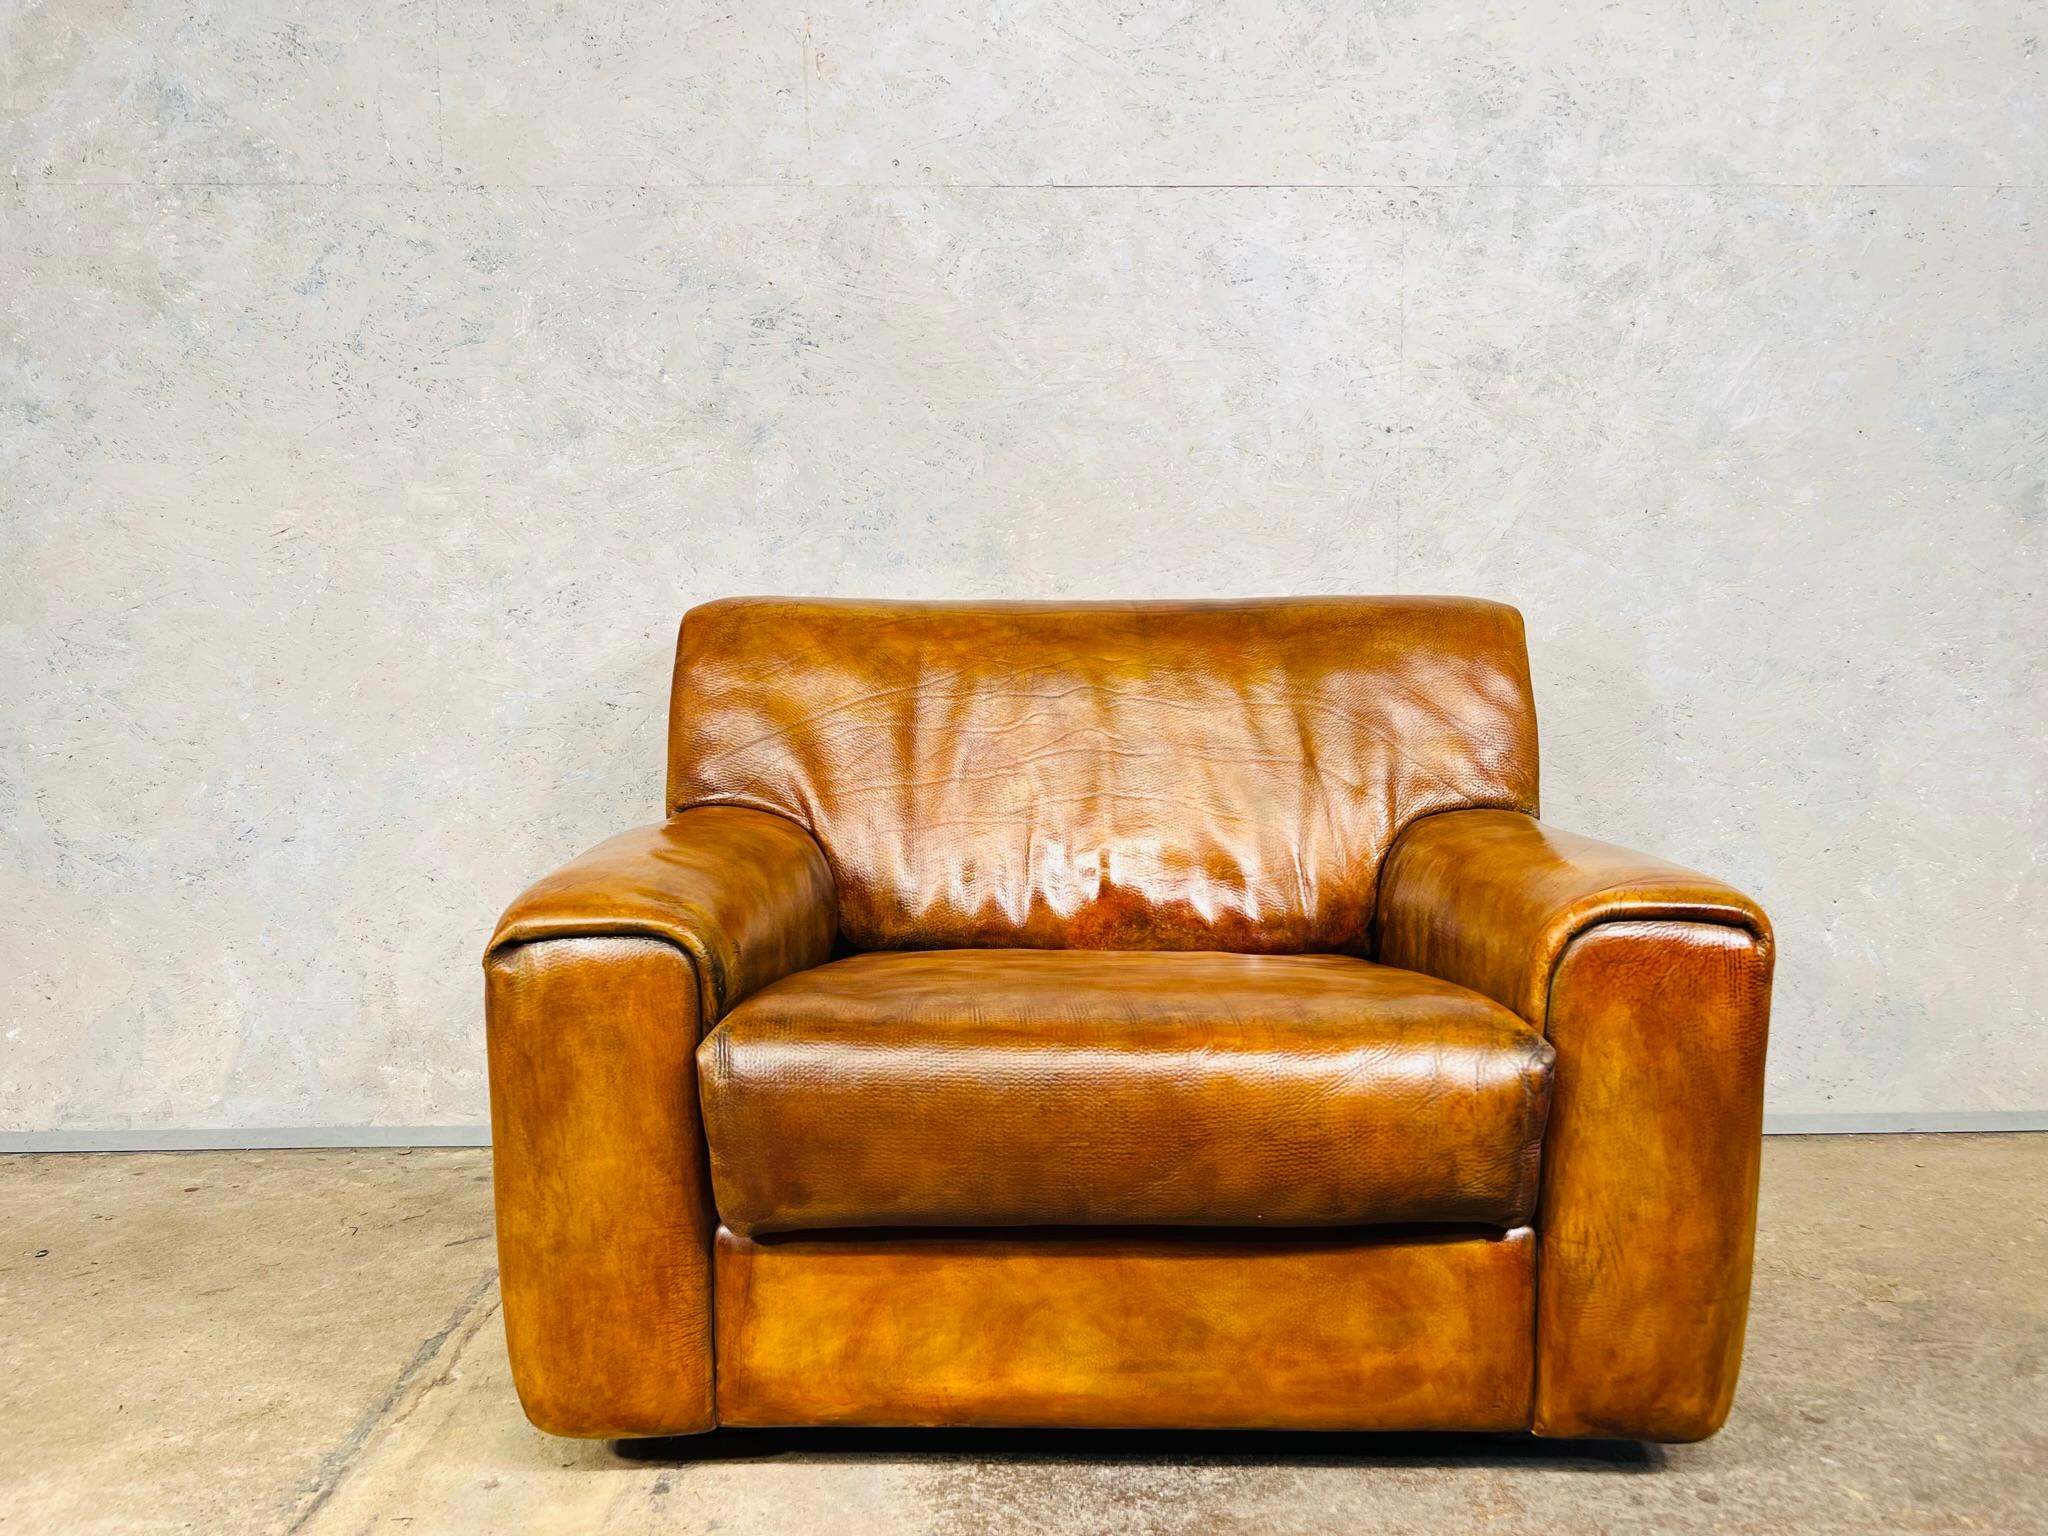 We are delighted to bring to you a an ultra rare original vintage De Sede DS 47 armchair. Hand built in the 1970s by De Sede craftsman in Switzerland, these pieces are upholstered in thick bull neck leather with characterful mast folds. The pieces